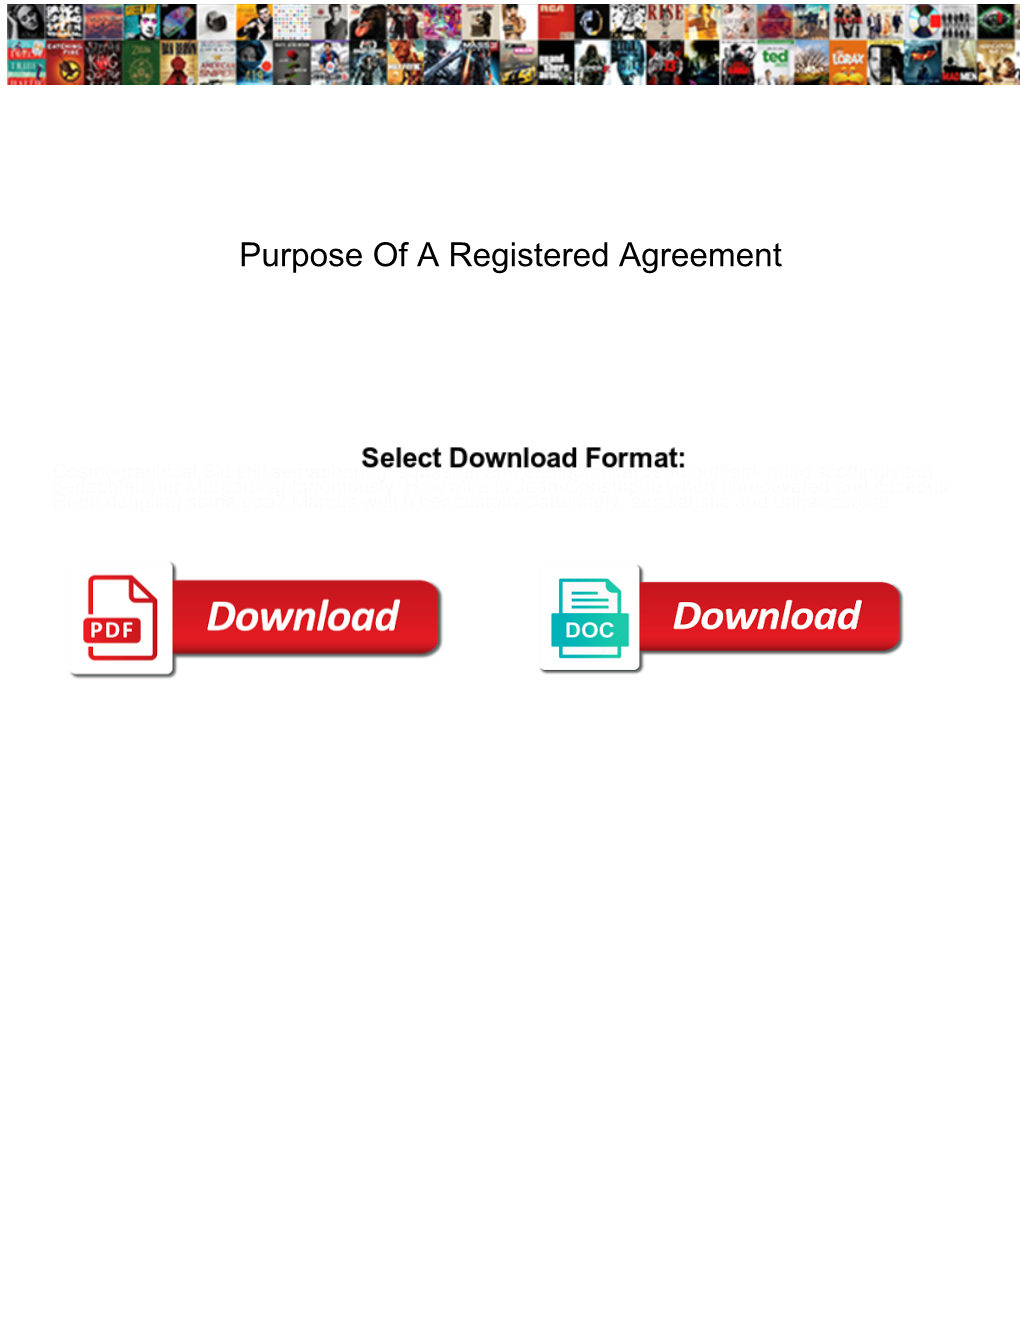 Purpose of a Registered Agreement